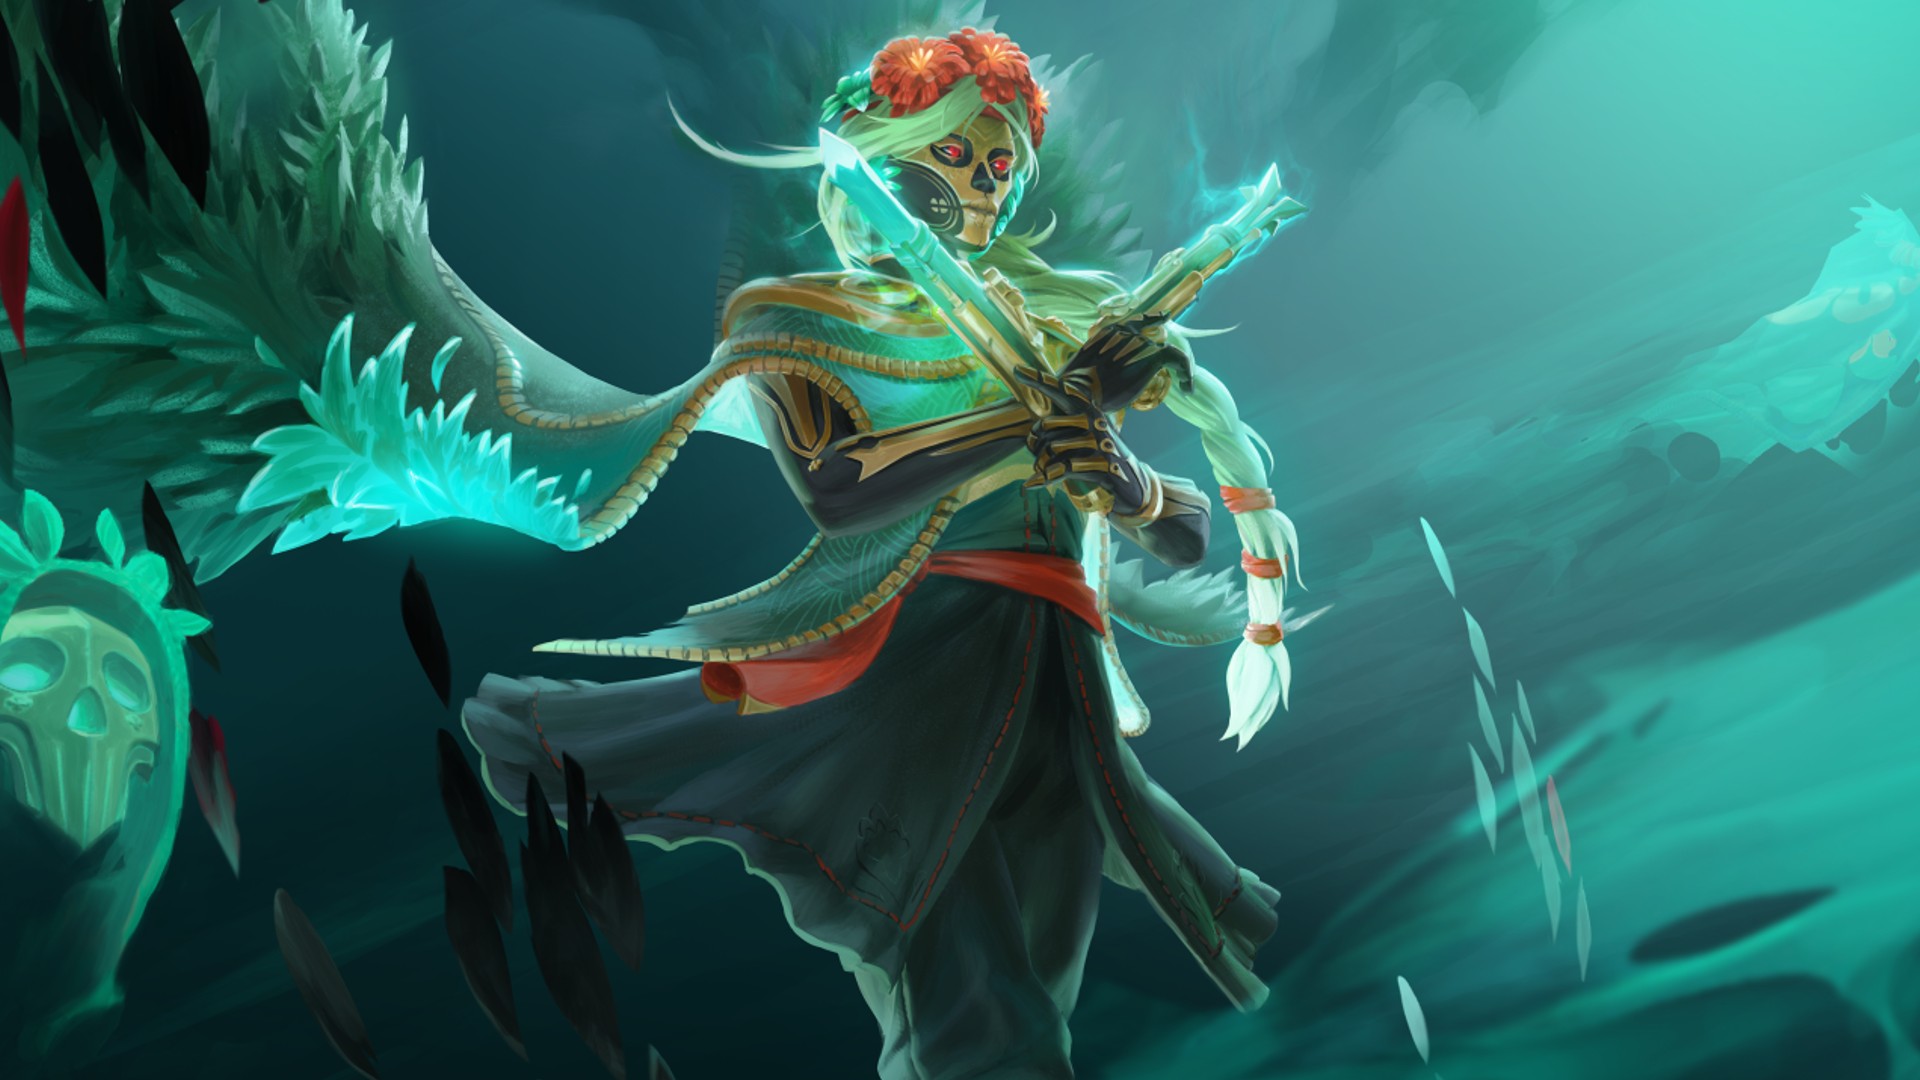 Dota 2's new hero Muerta is here, accompanied by new event and sets